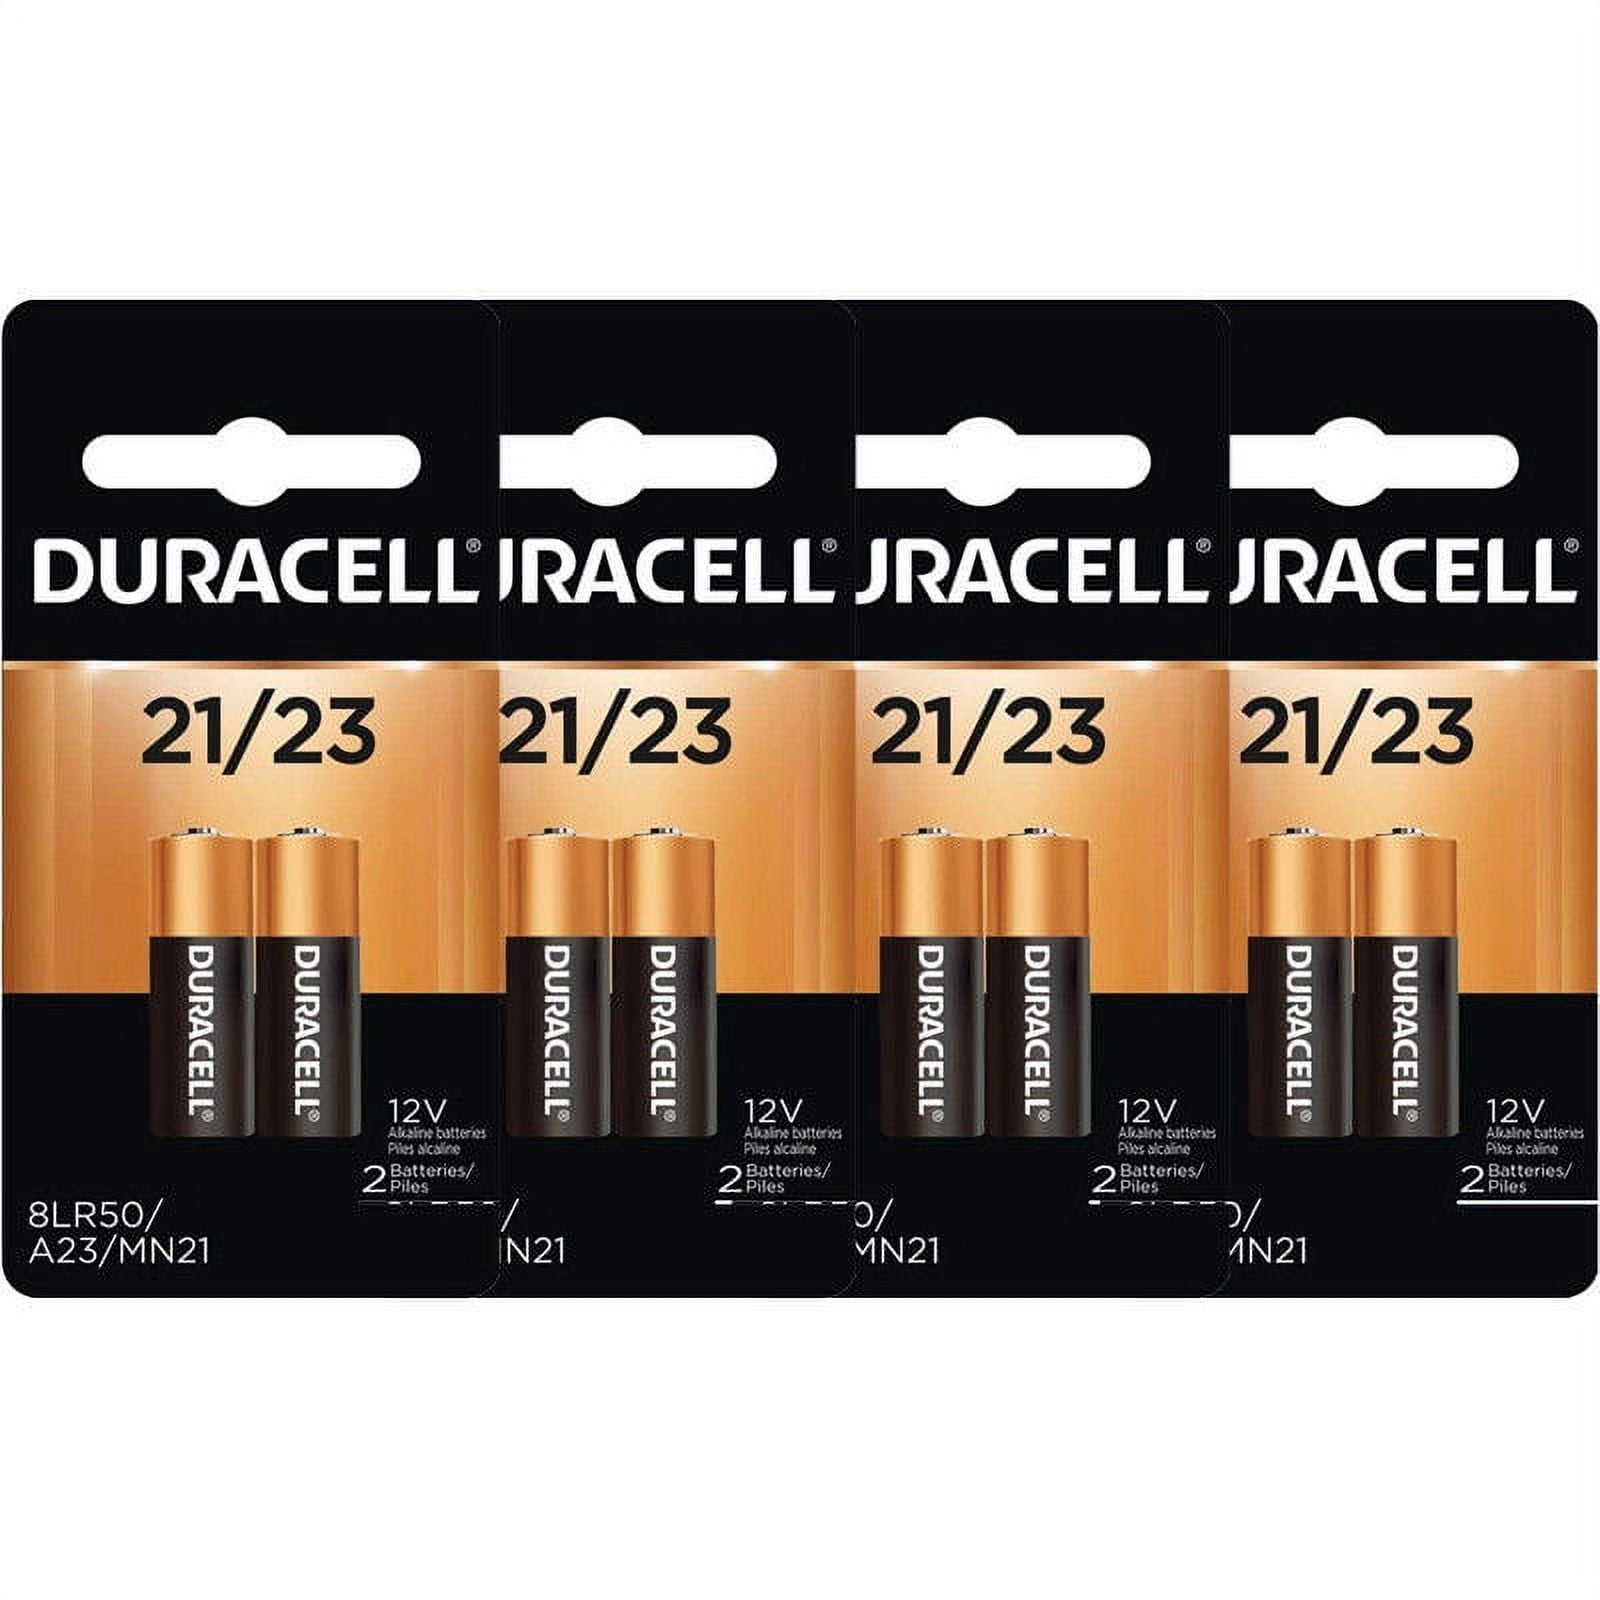  PKECLL 23A 12 Volt Battery, 15 Pack A23 Battery for Garage Door  Openers Ceiling Fan Remotes Doorbells (15 Pack) : Health & Household